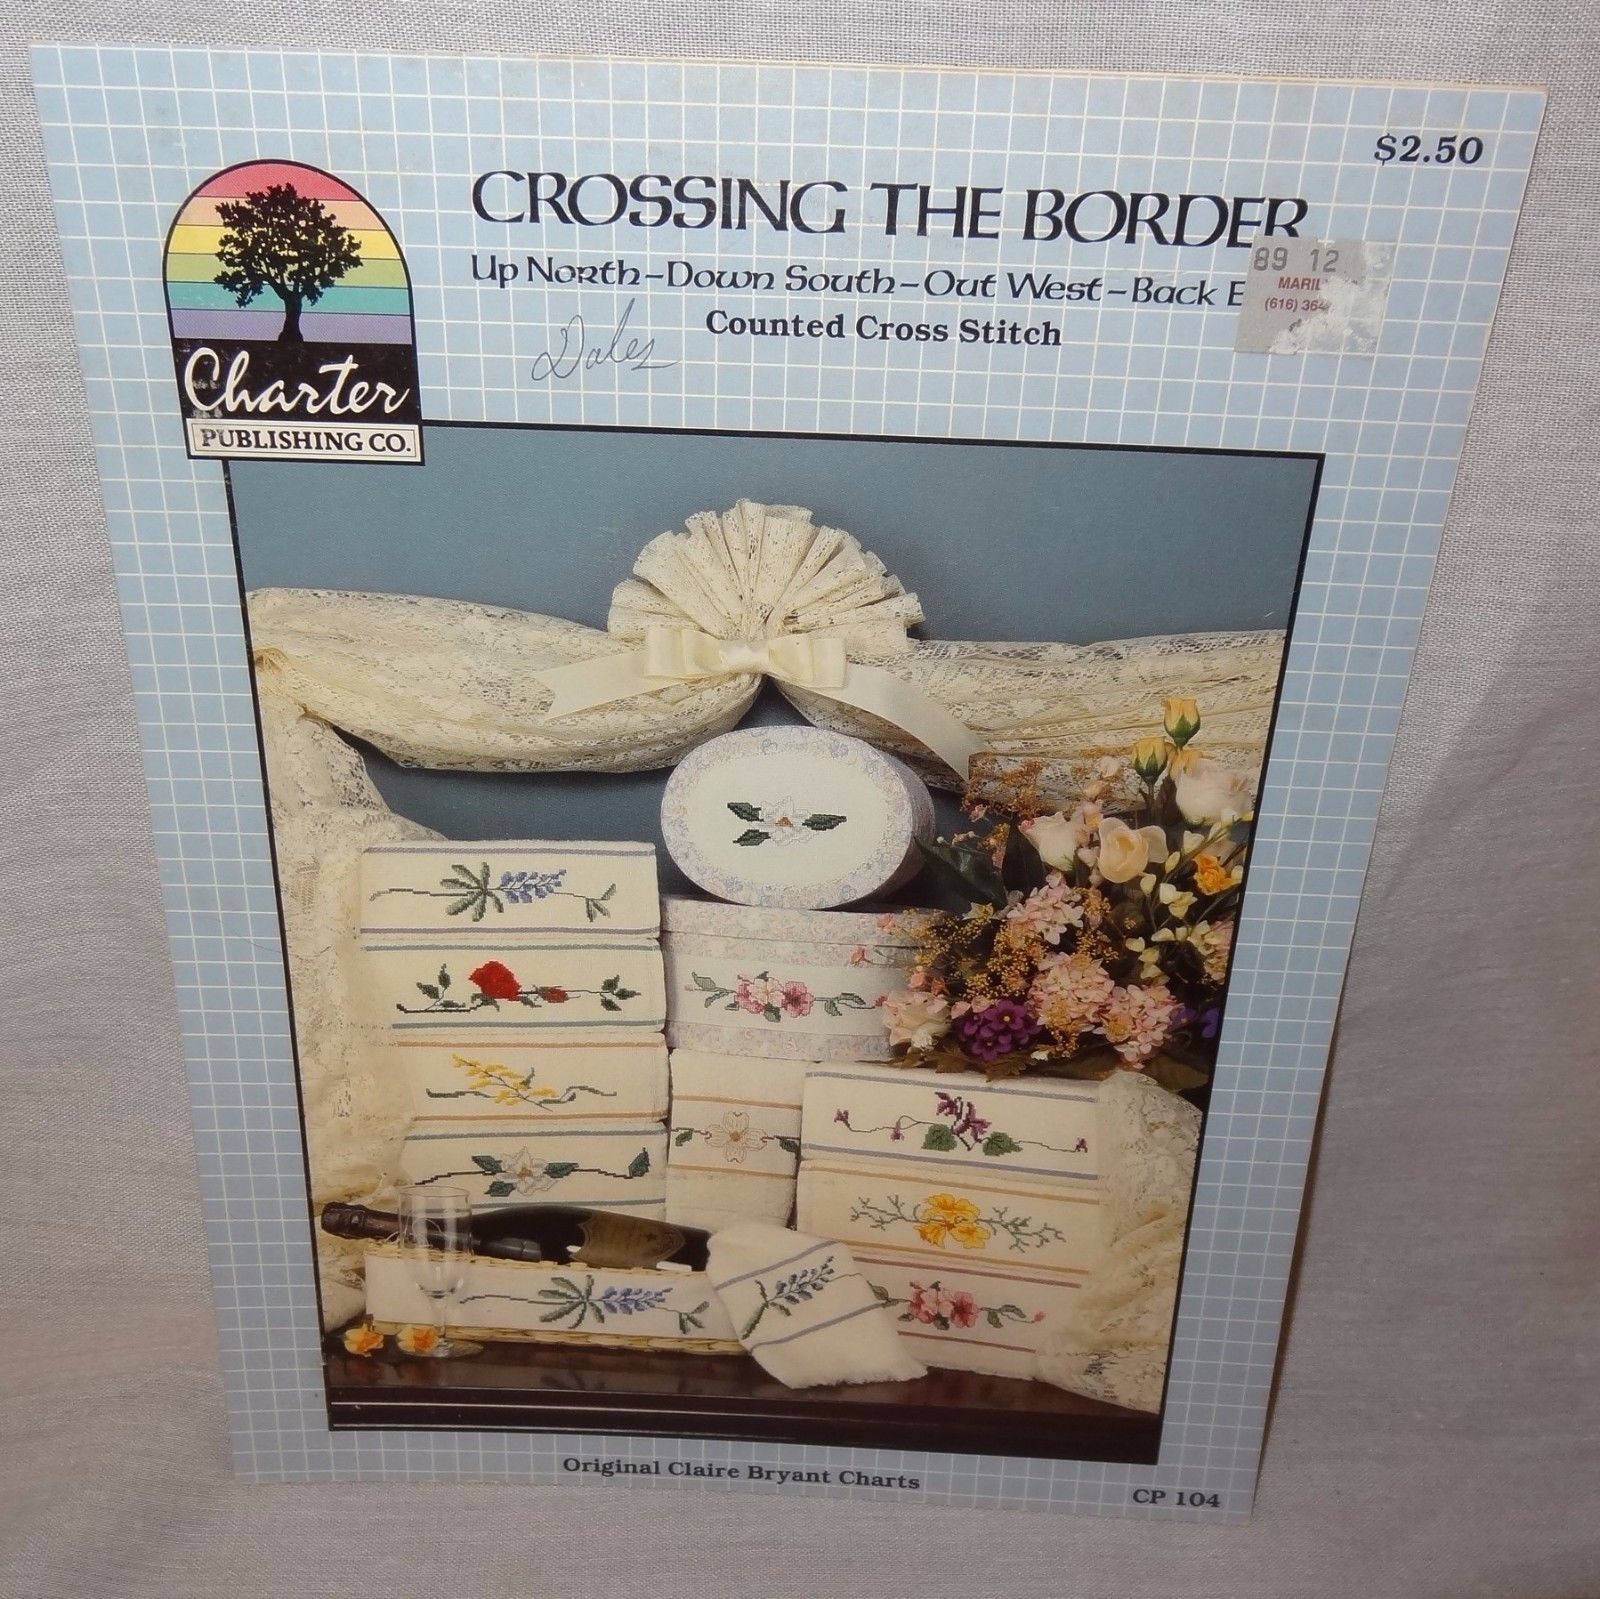 Crossing the Border Flowers Towels Cross Stitch Pattern Booklet 1988 CP 104 - $7.99